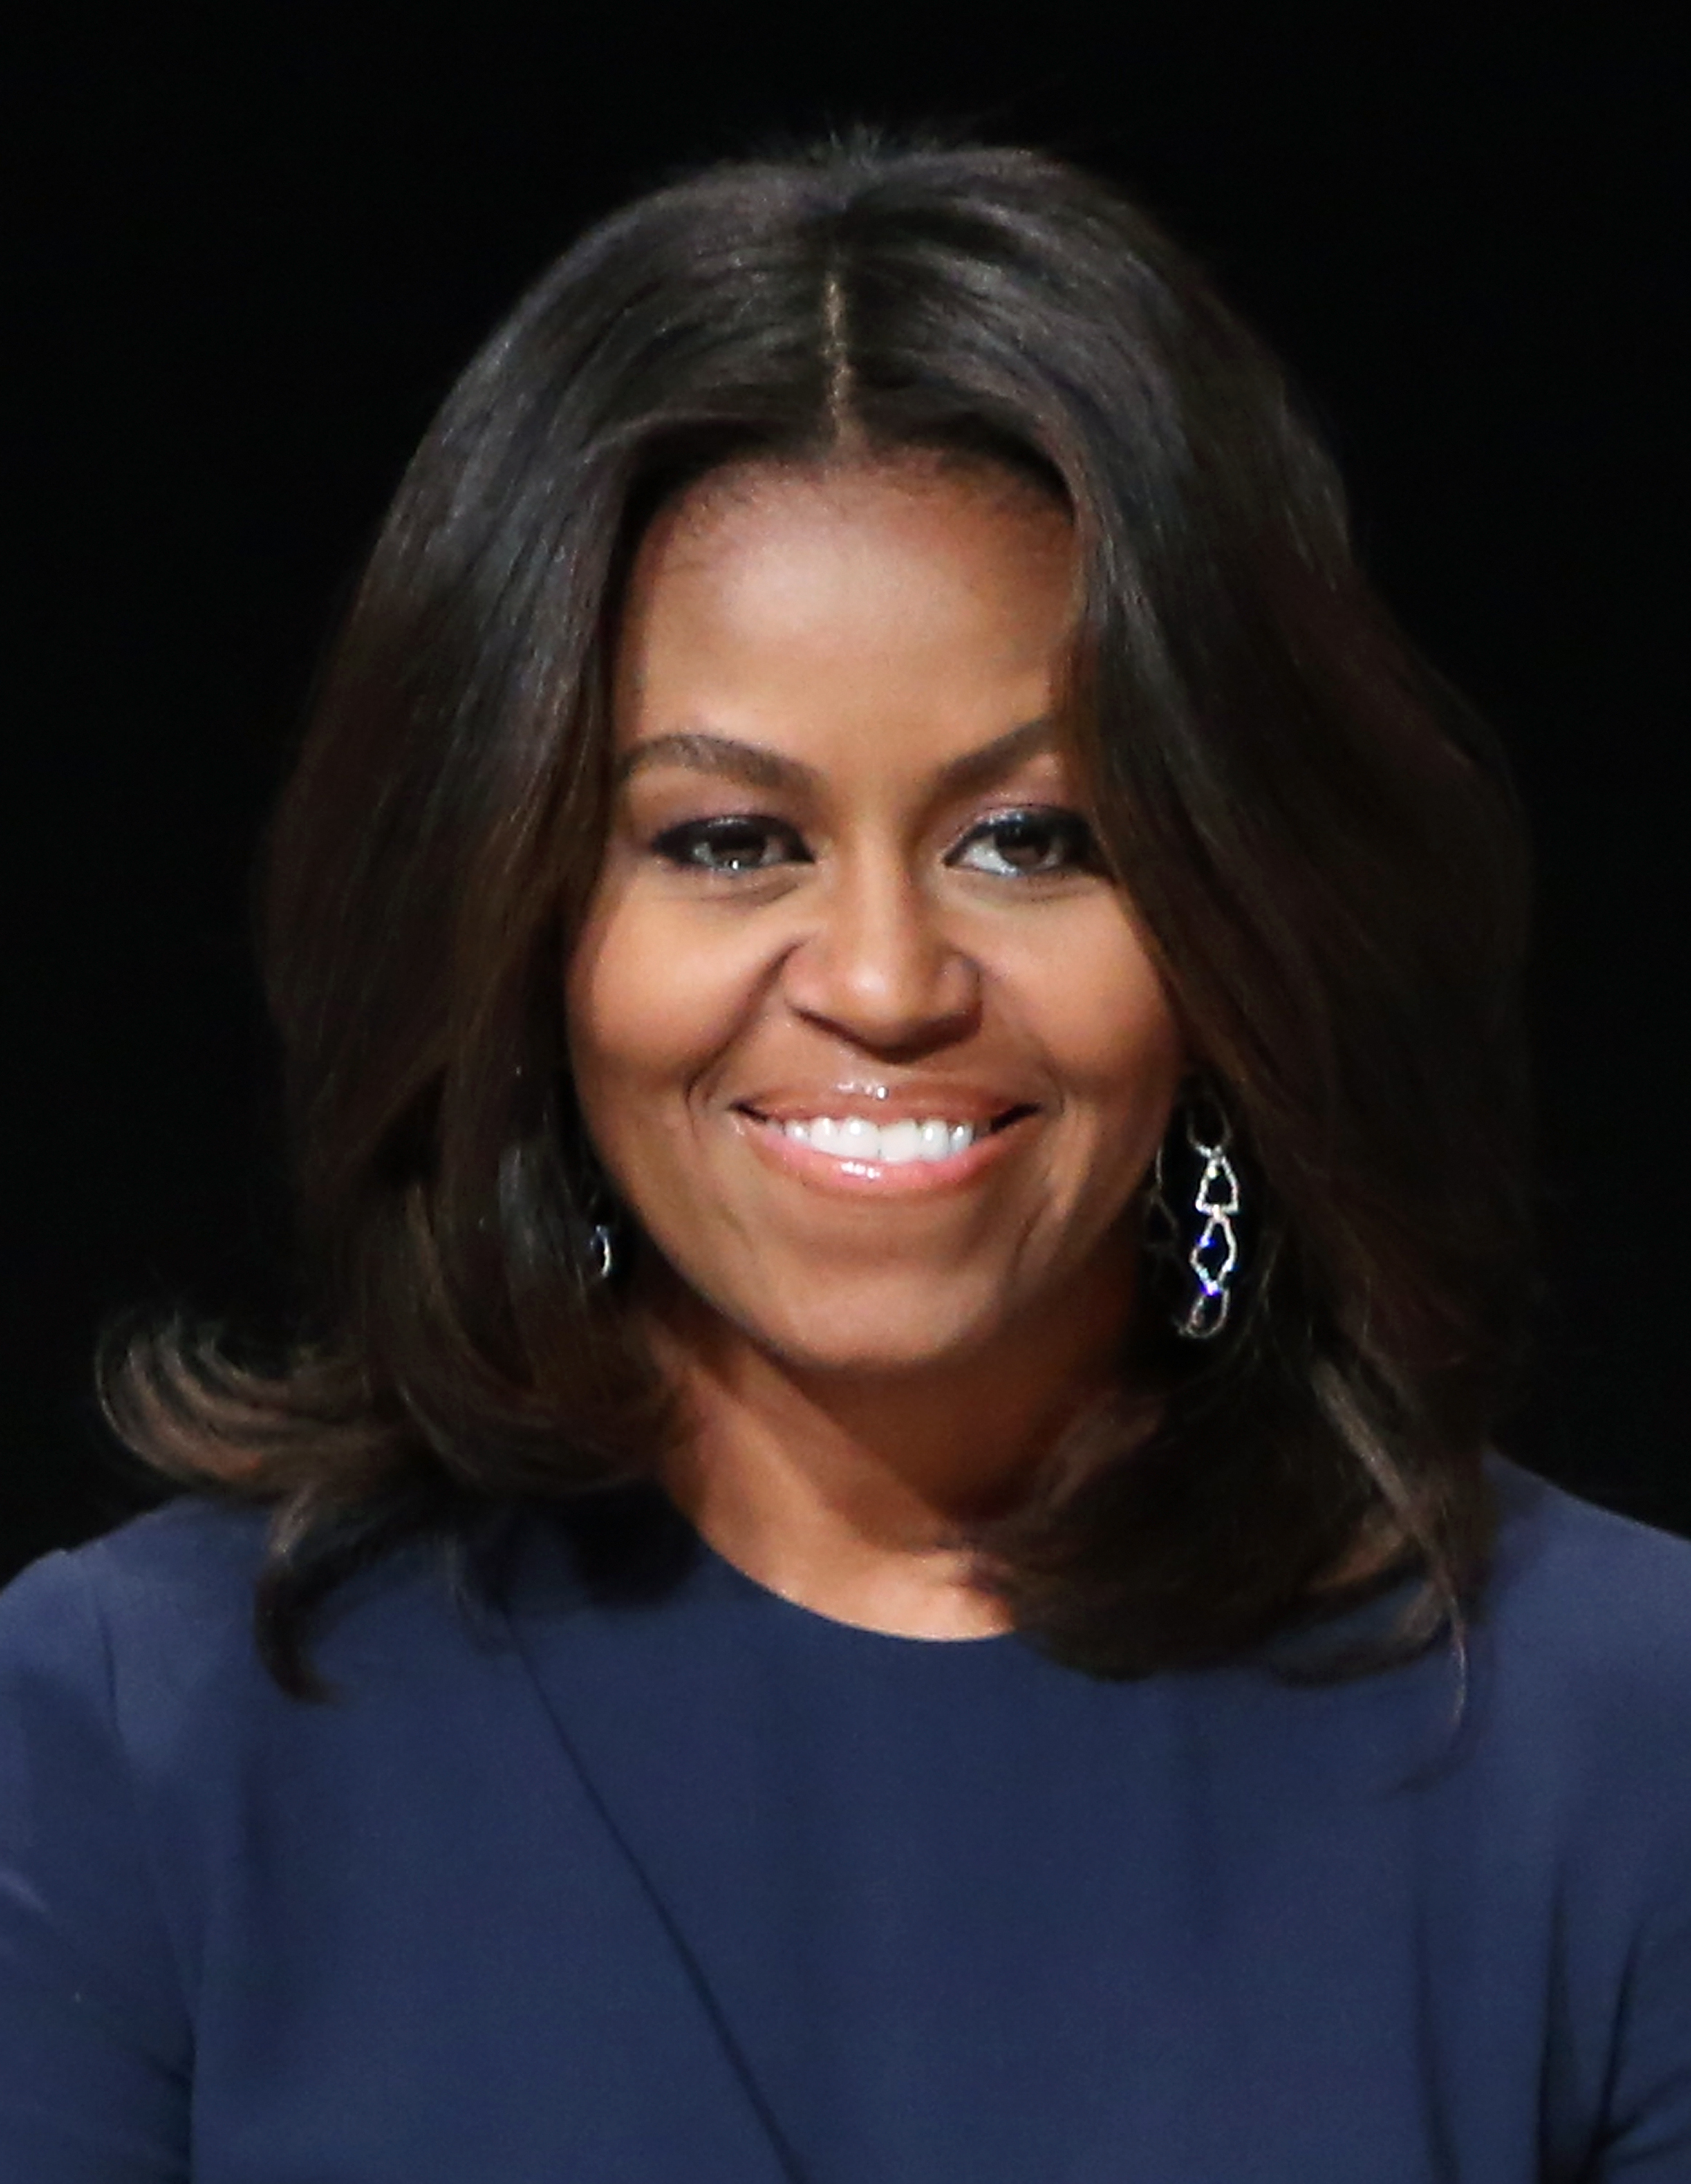 First Lady of the United States Michelle Obama at the "Let Girls Learn" Global Conversation in New York City on Sept. 29, 2015.